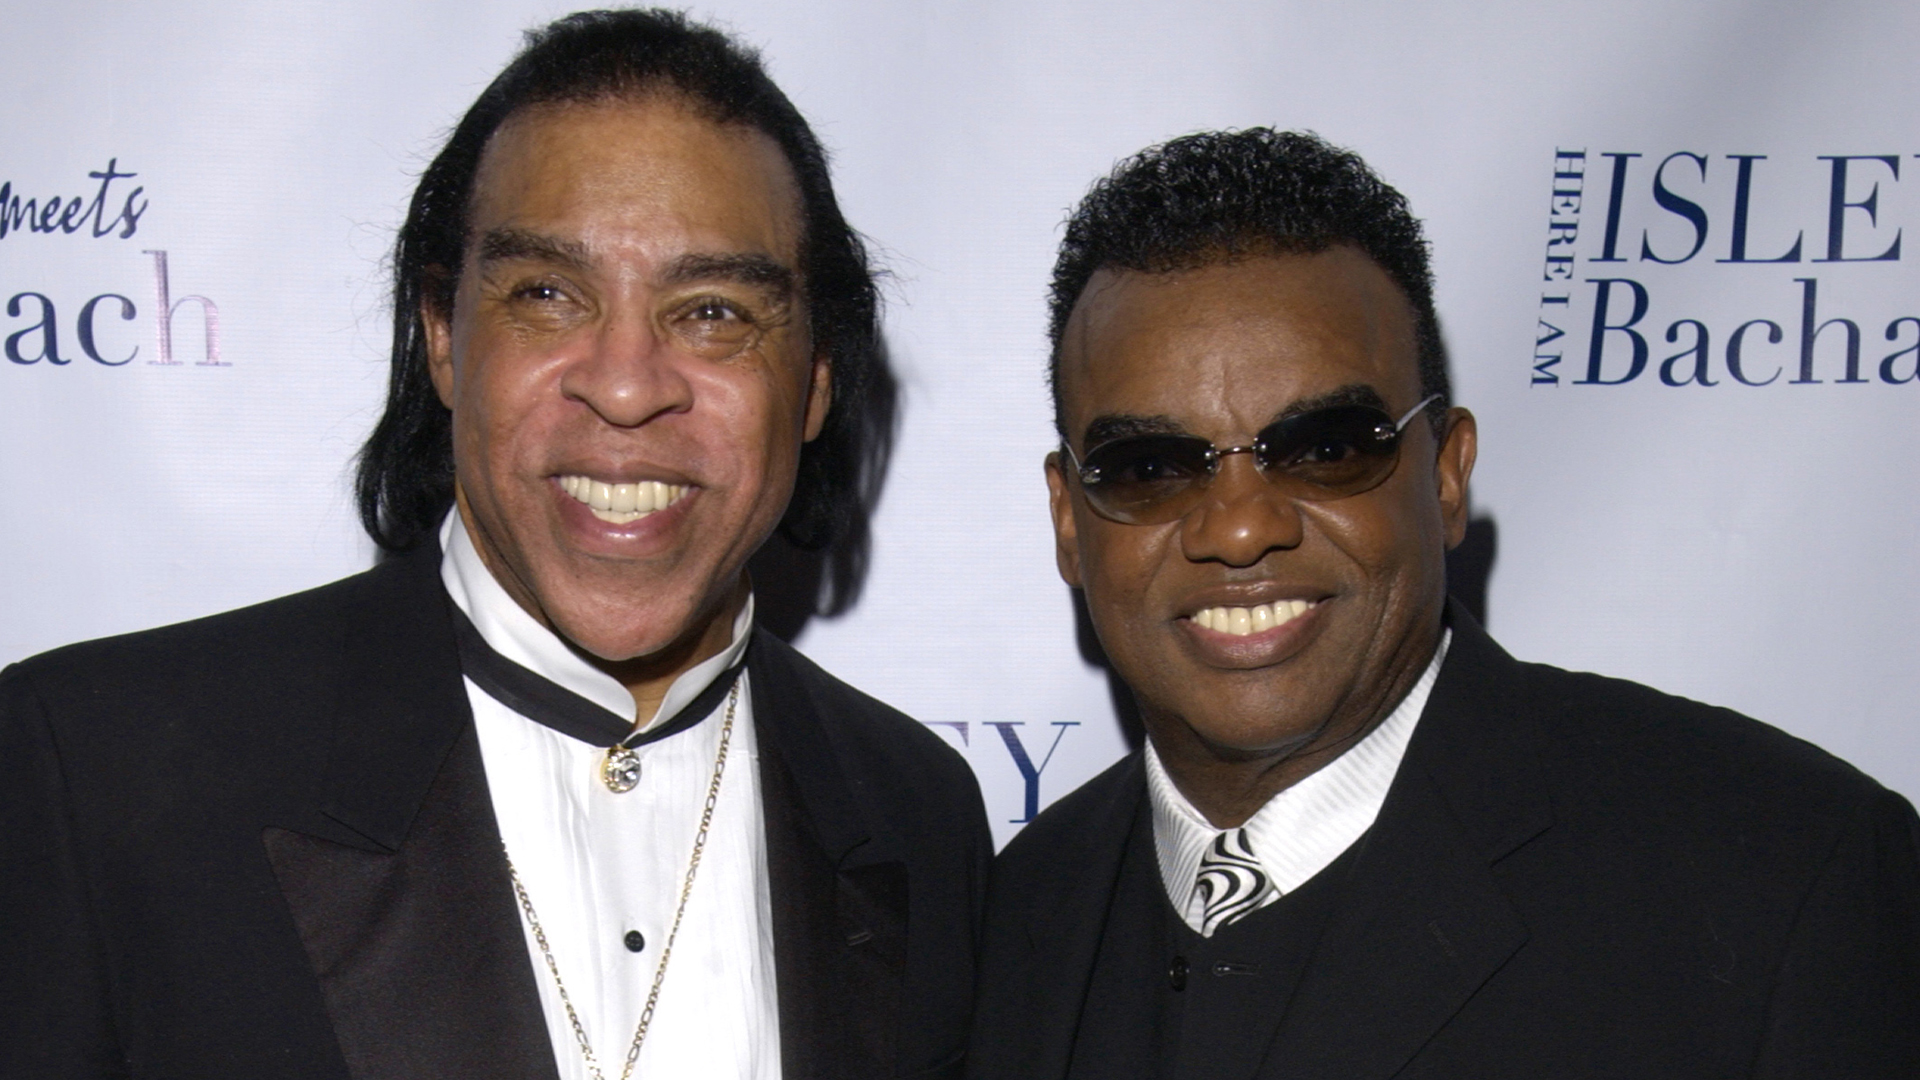 Rudolph Isley Accuses Ronald Isley Of Filing For 'The Isley Brothers' Trademark Without His Approval